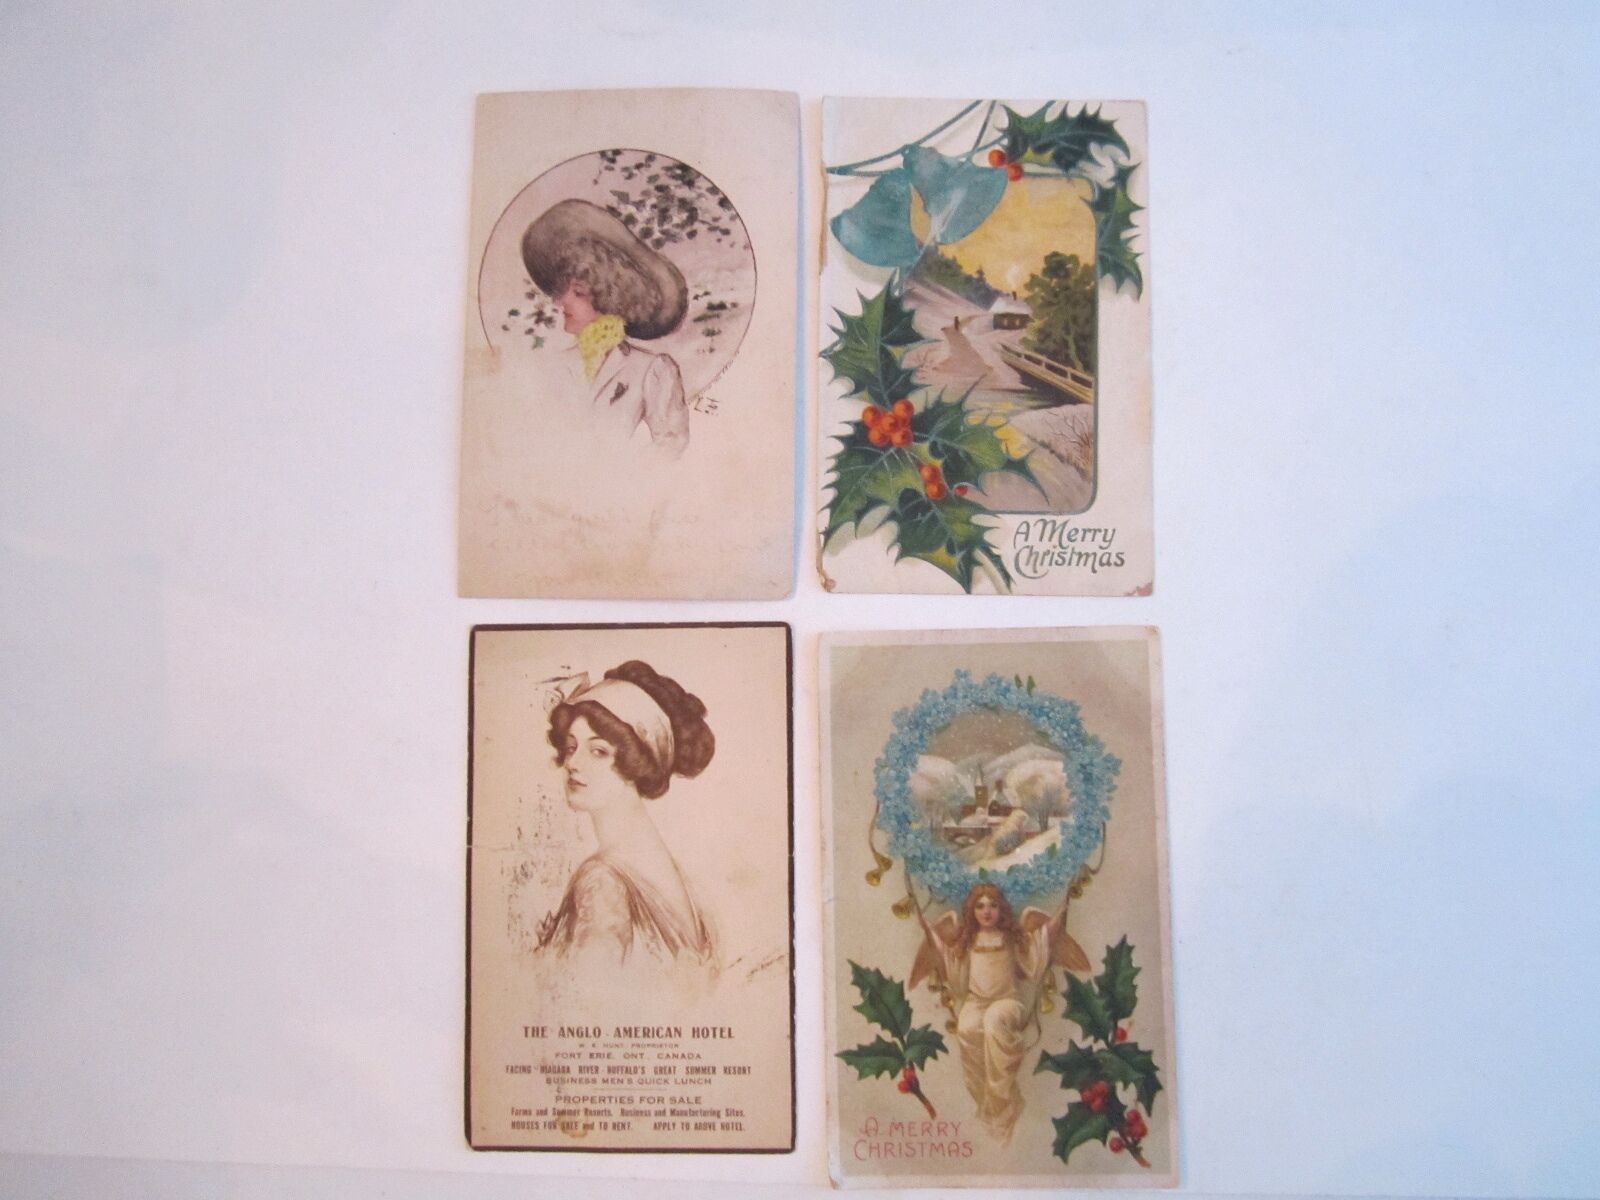 10 EARLY 1900'S POSTCARDS - GREETING CARDS - MOST ARE STAMPED - LOT # 4 - BB-2